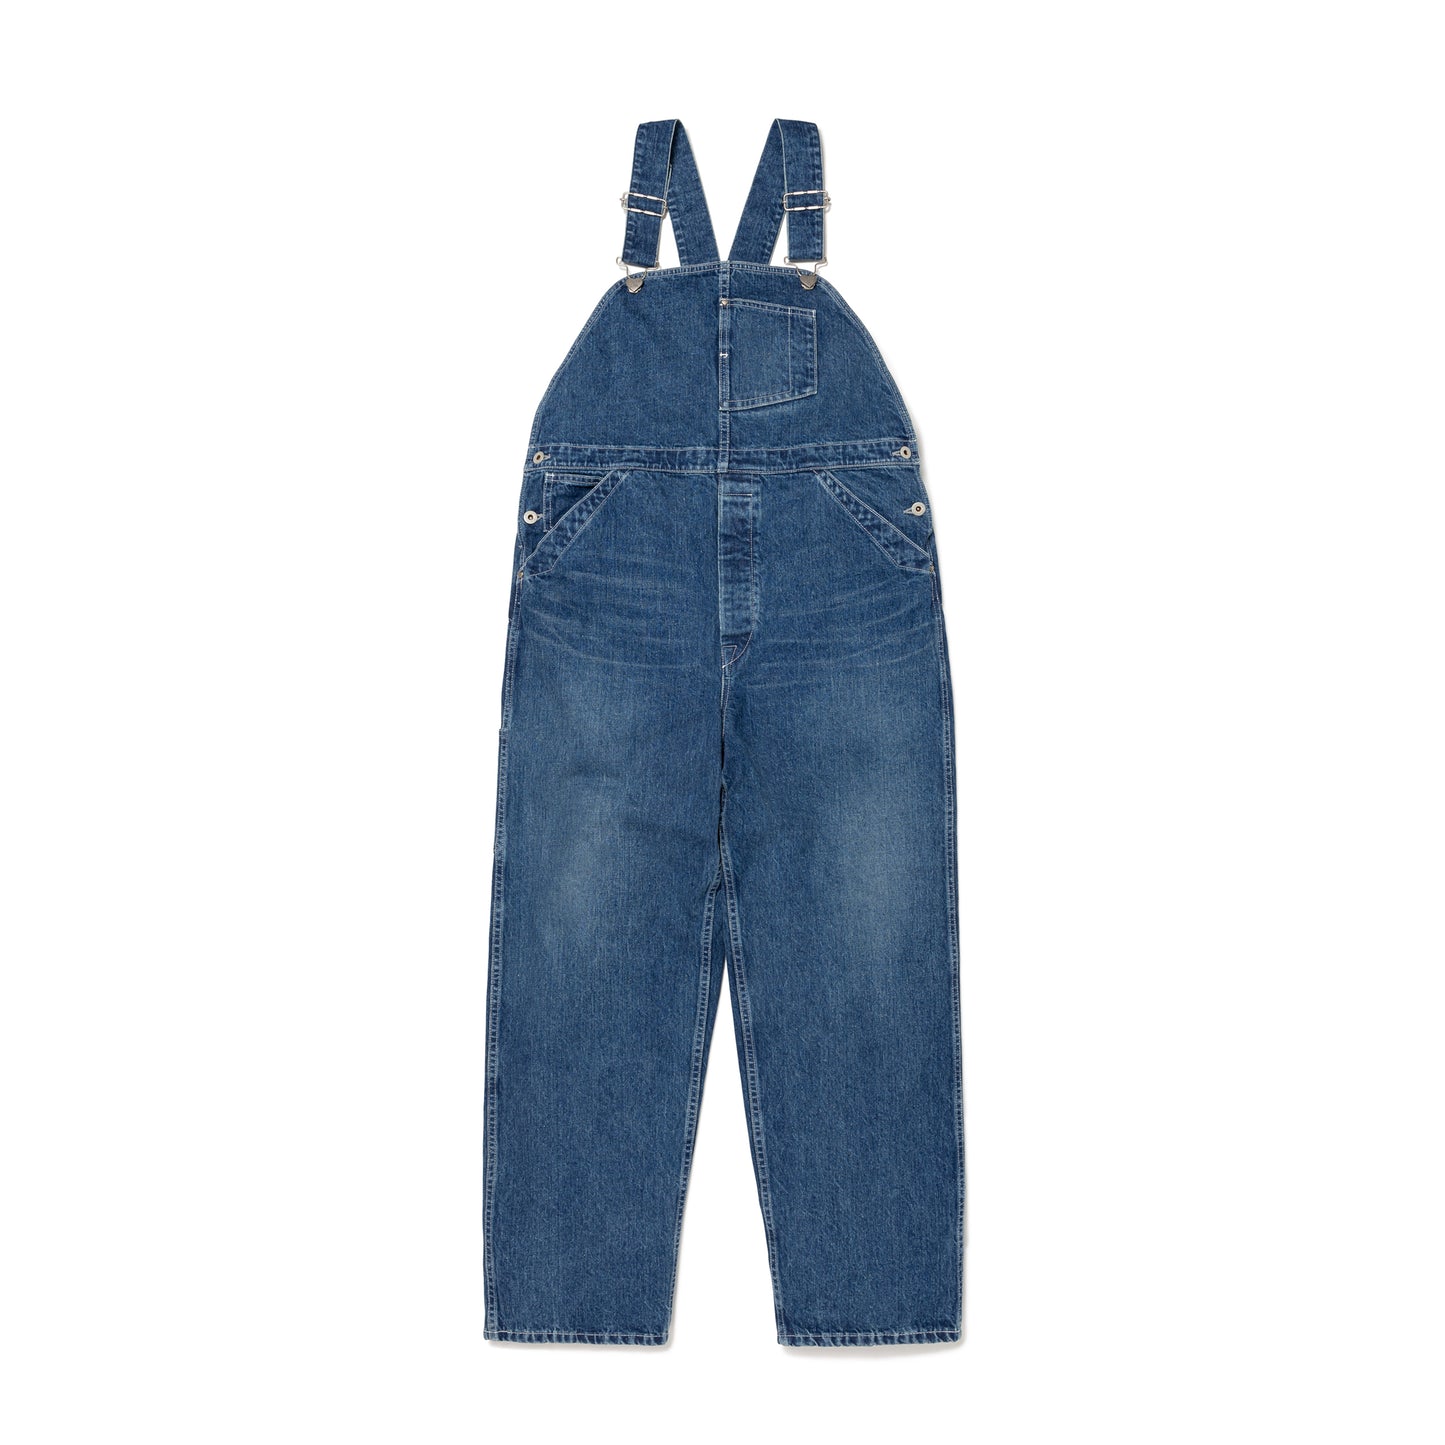 HUMAN MADE DENIM OVERALLS IN-A